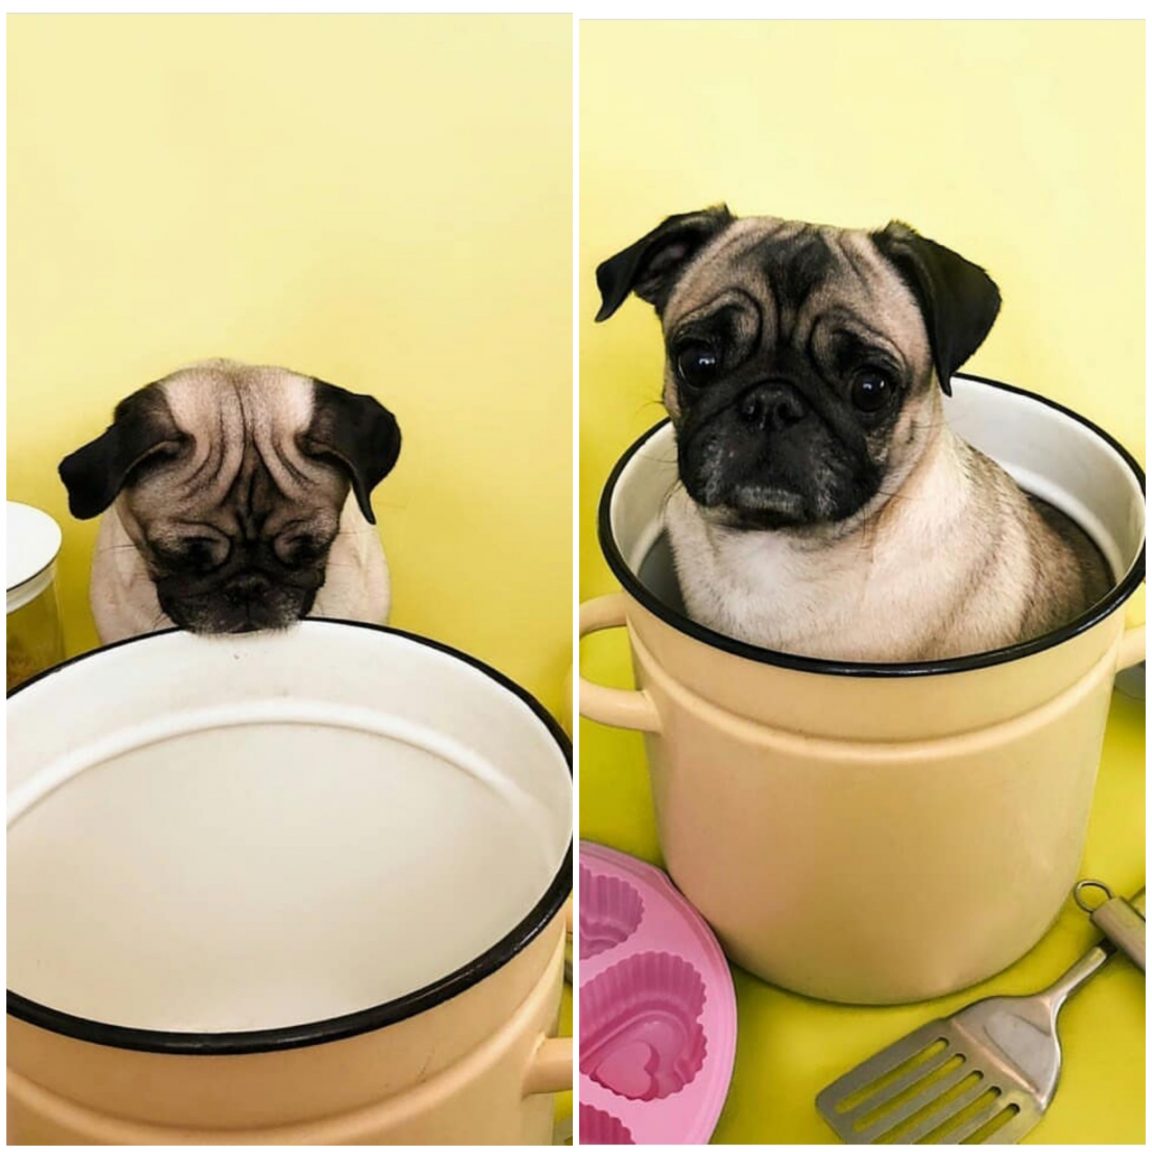 two photos of a pug staring at the big coffee mug and sitting inside it